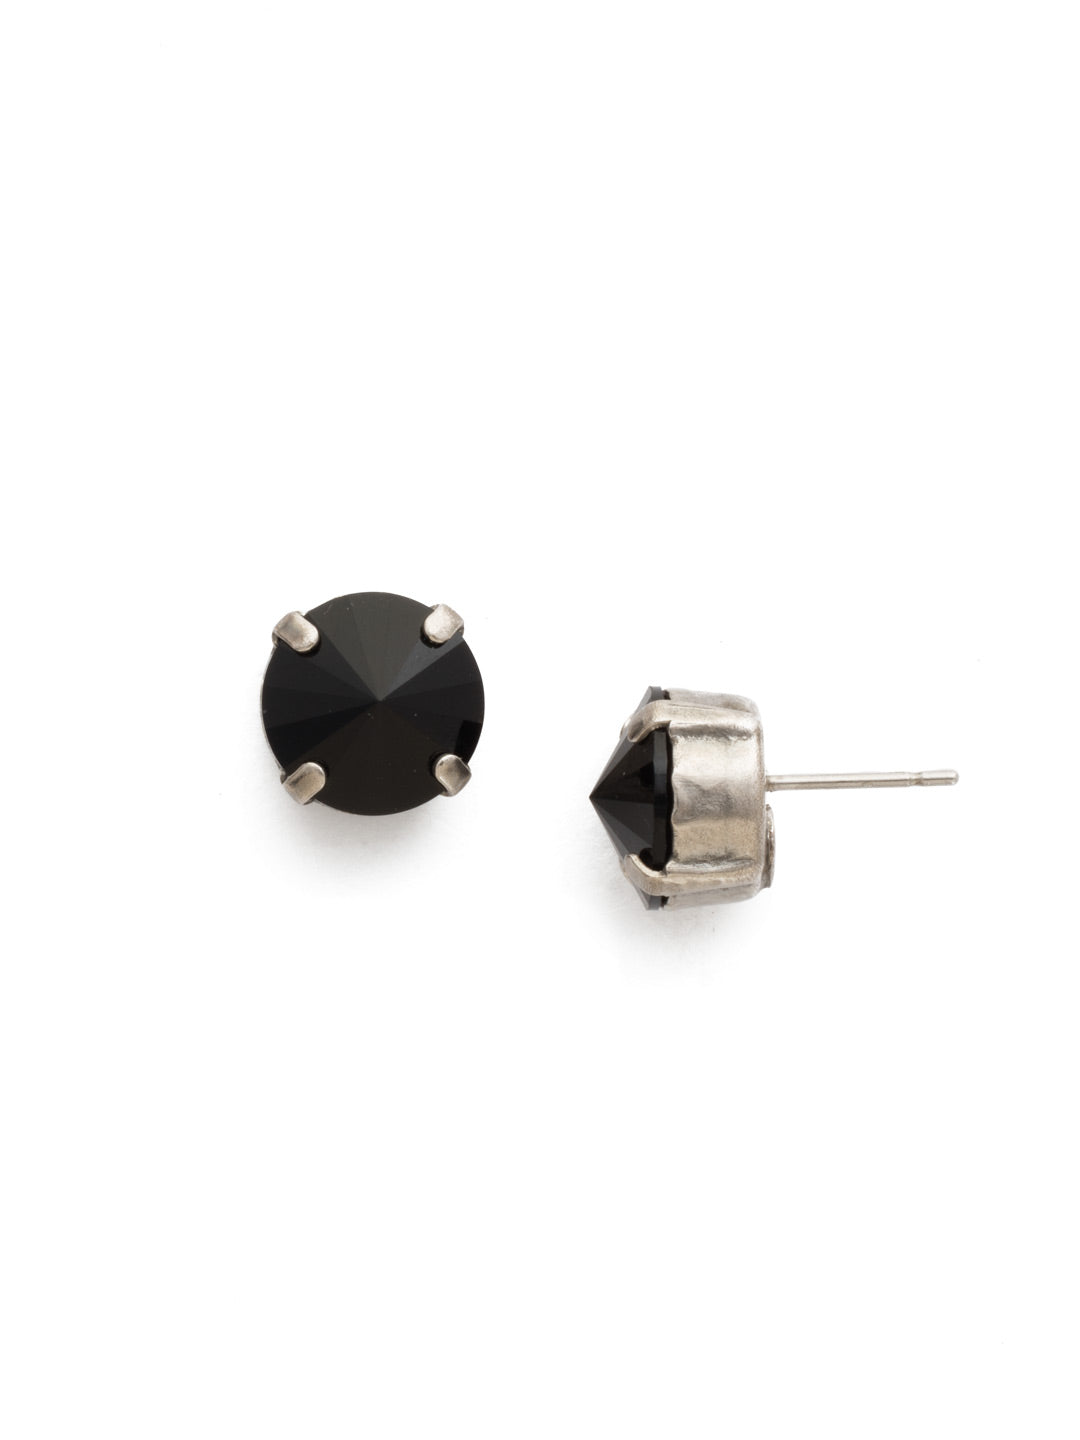 London Stud Earrings - ECM14ASJET - <p>Everyone needs a great pair of studs. Add some classic sparkle to any occasion with these stud earrings. Need help picking a stud? <a href="https://www.sorrelli.com/blogs/sisterhood/round-stud-earrings-101-a-rundown-of-sizes-styles-and-sparkle">Check out our size guide!</a> From Sorrelli's Jet collection in our Antique Silver-tone finish.</p>